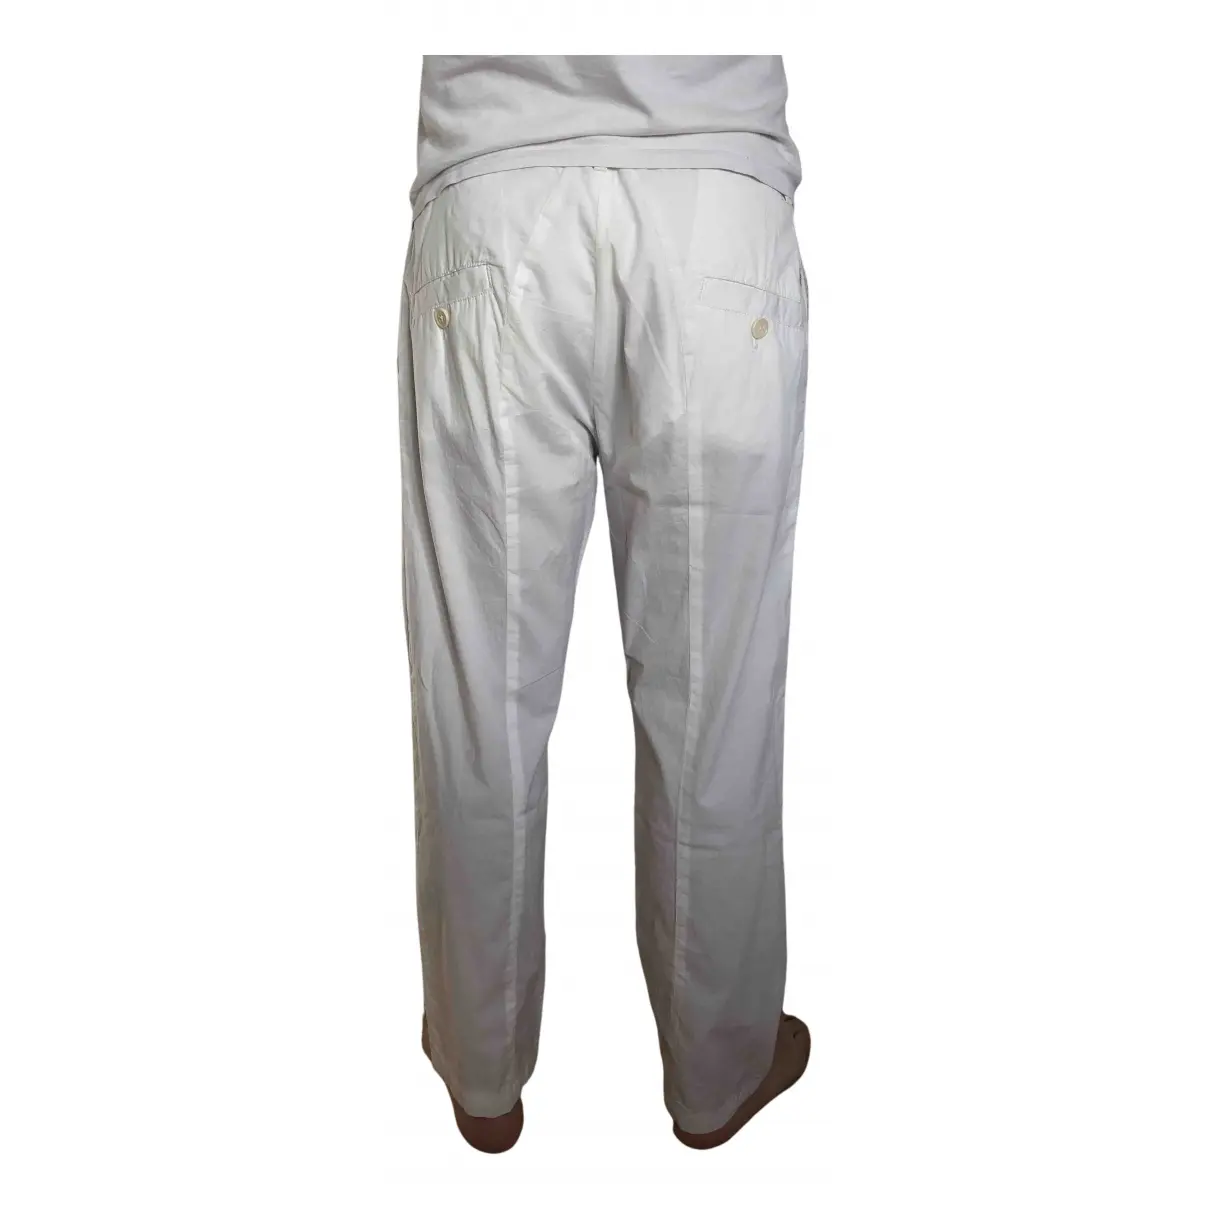 Buy Armani Jeans Trousers online